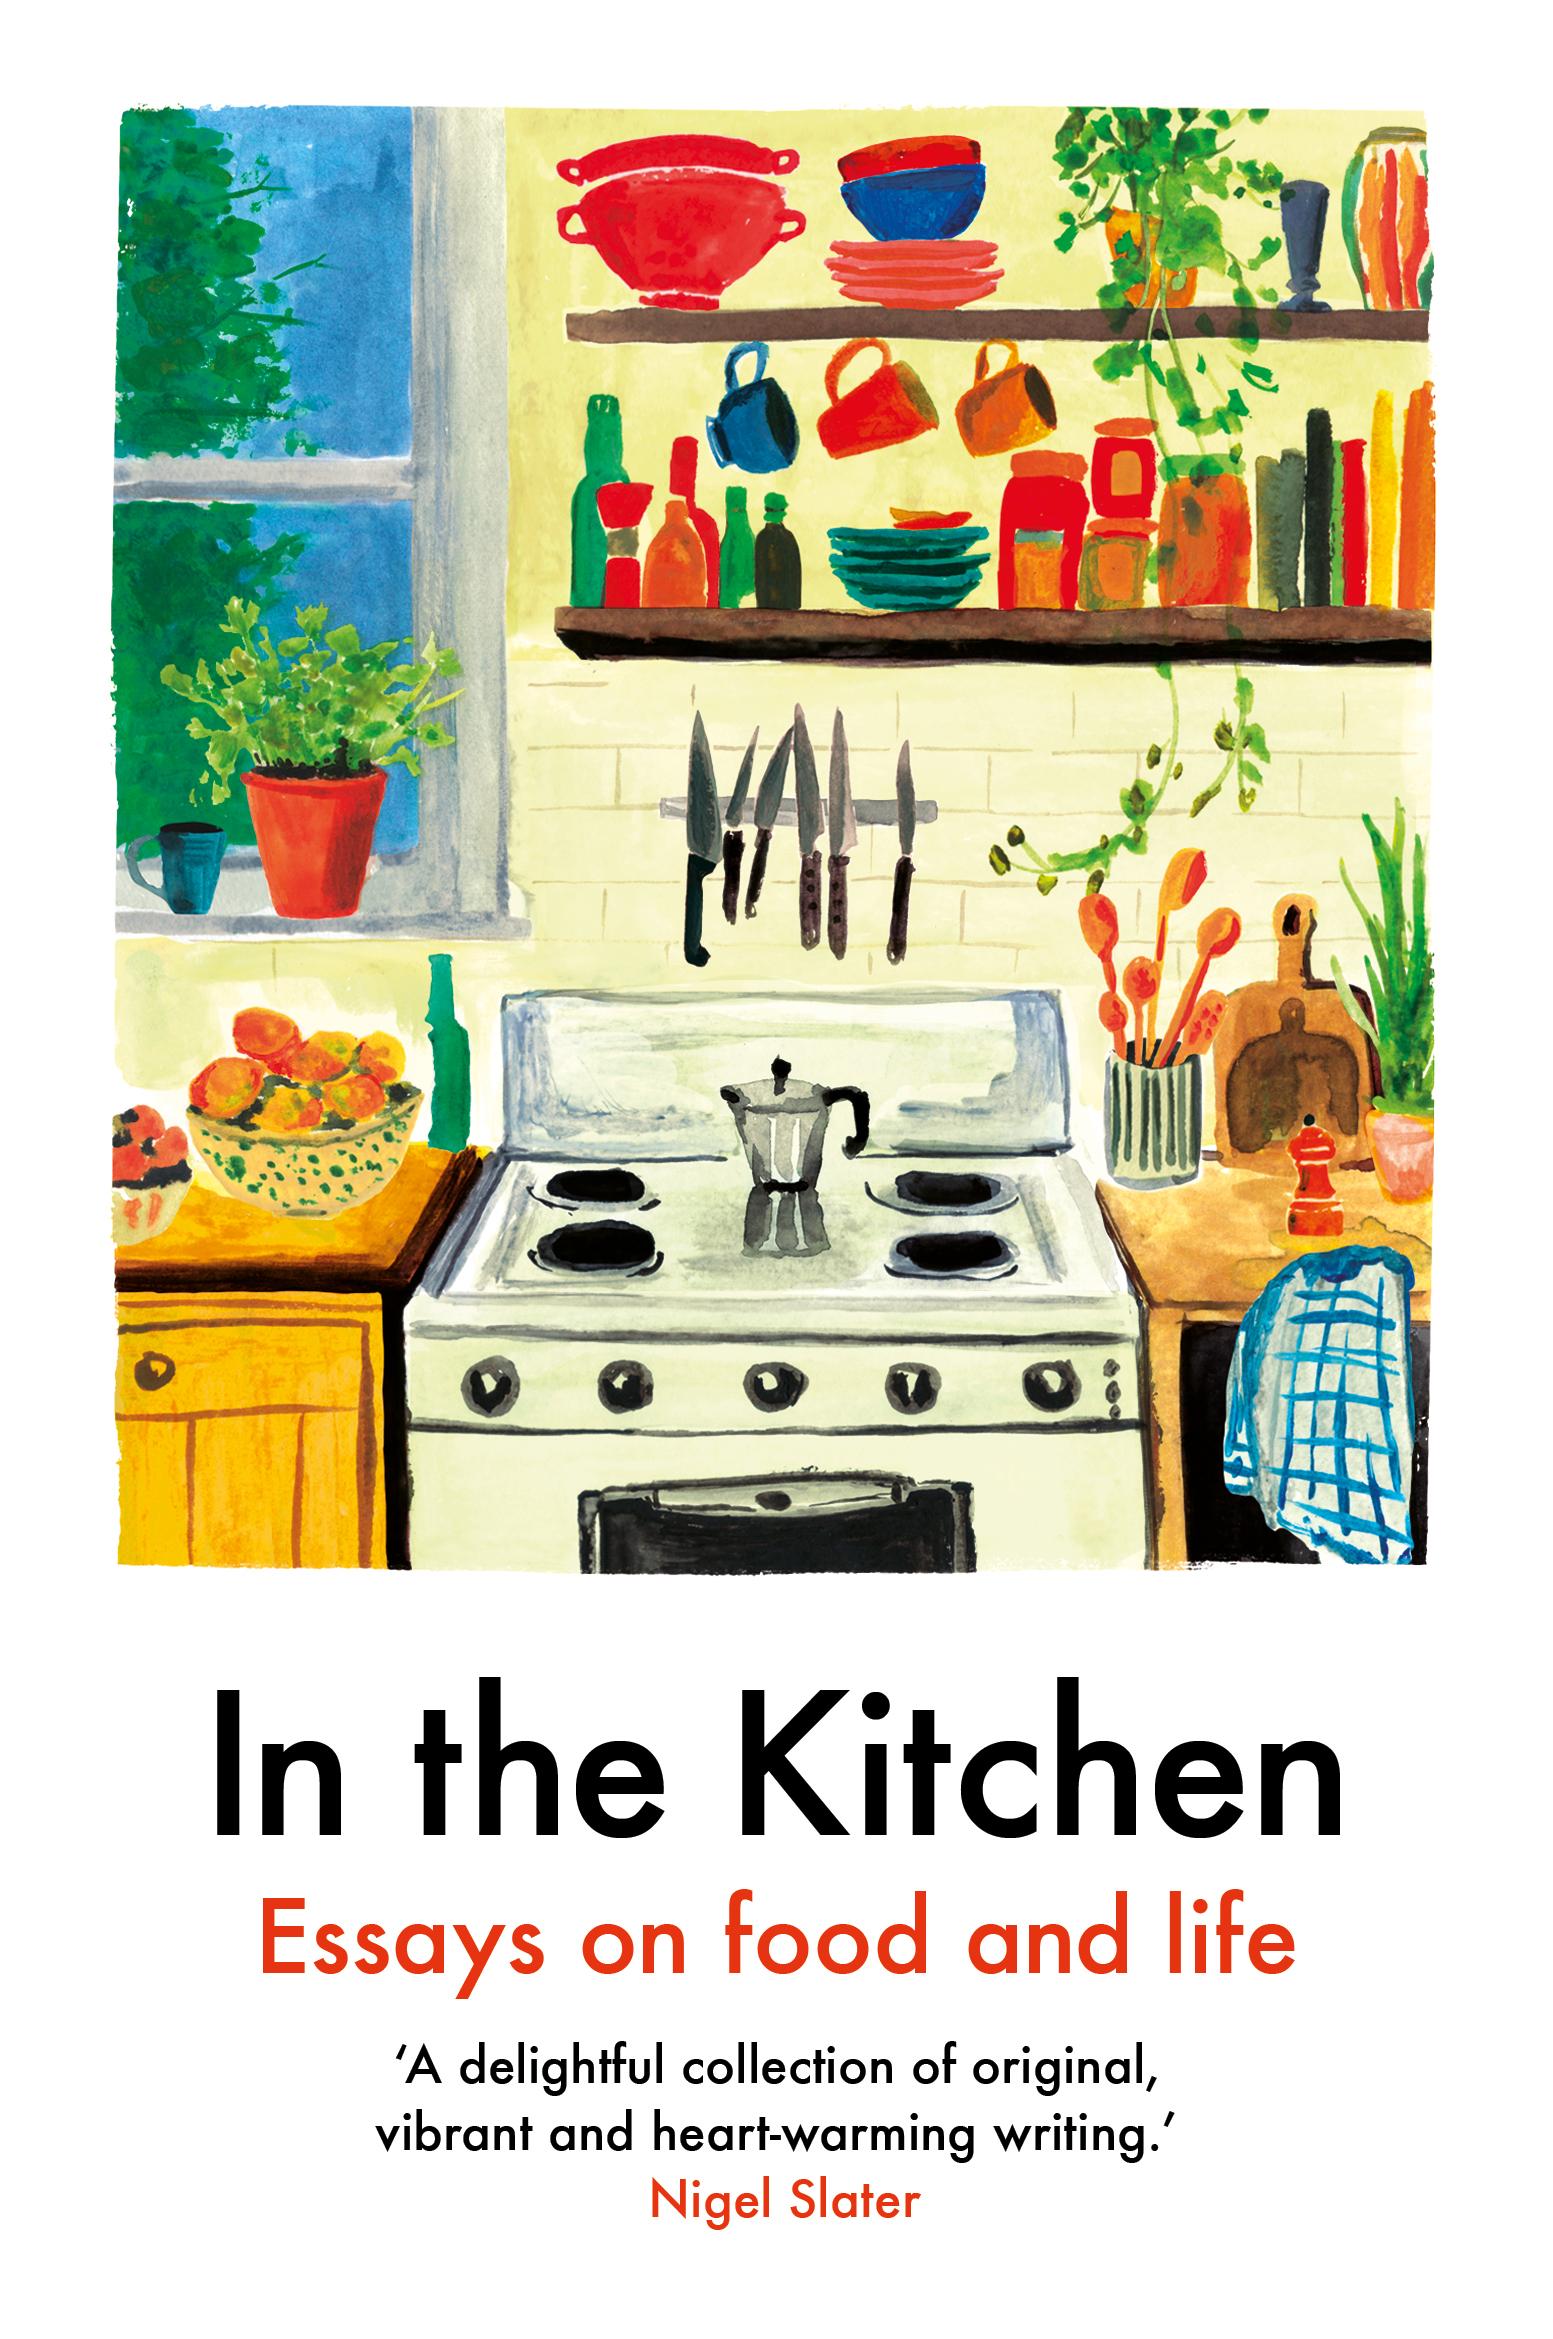 In The Kitchen: Essays on Food and Life